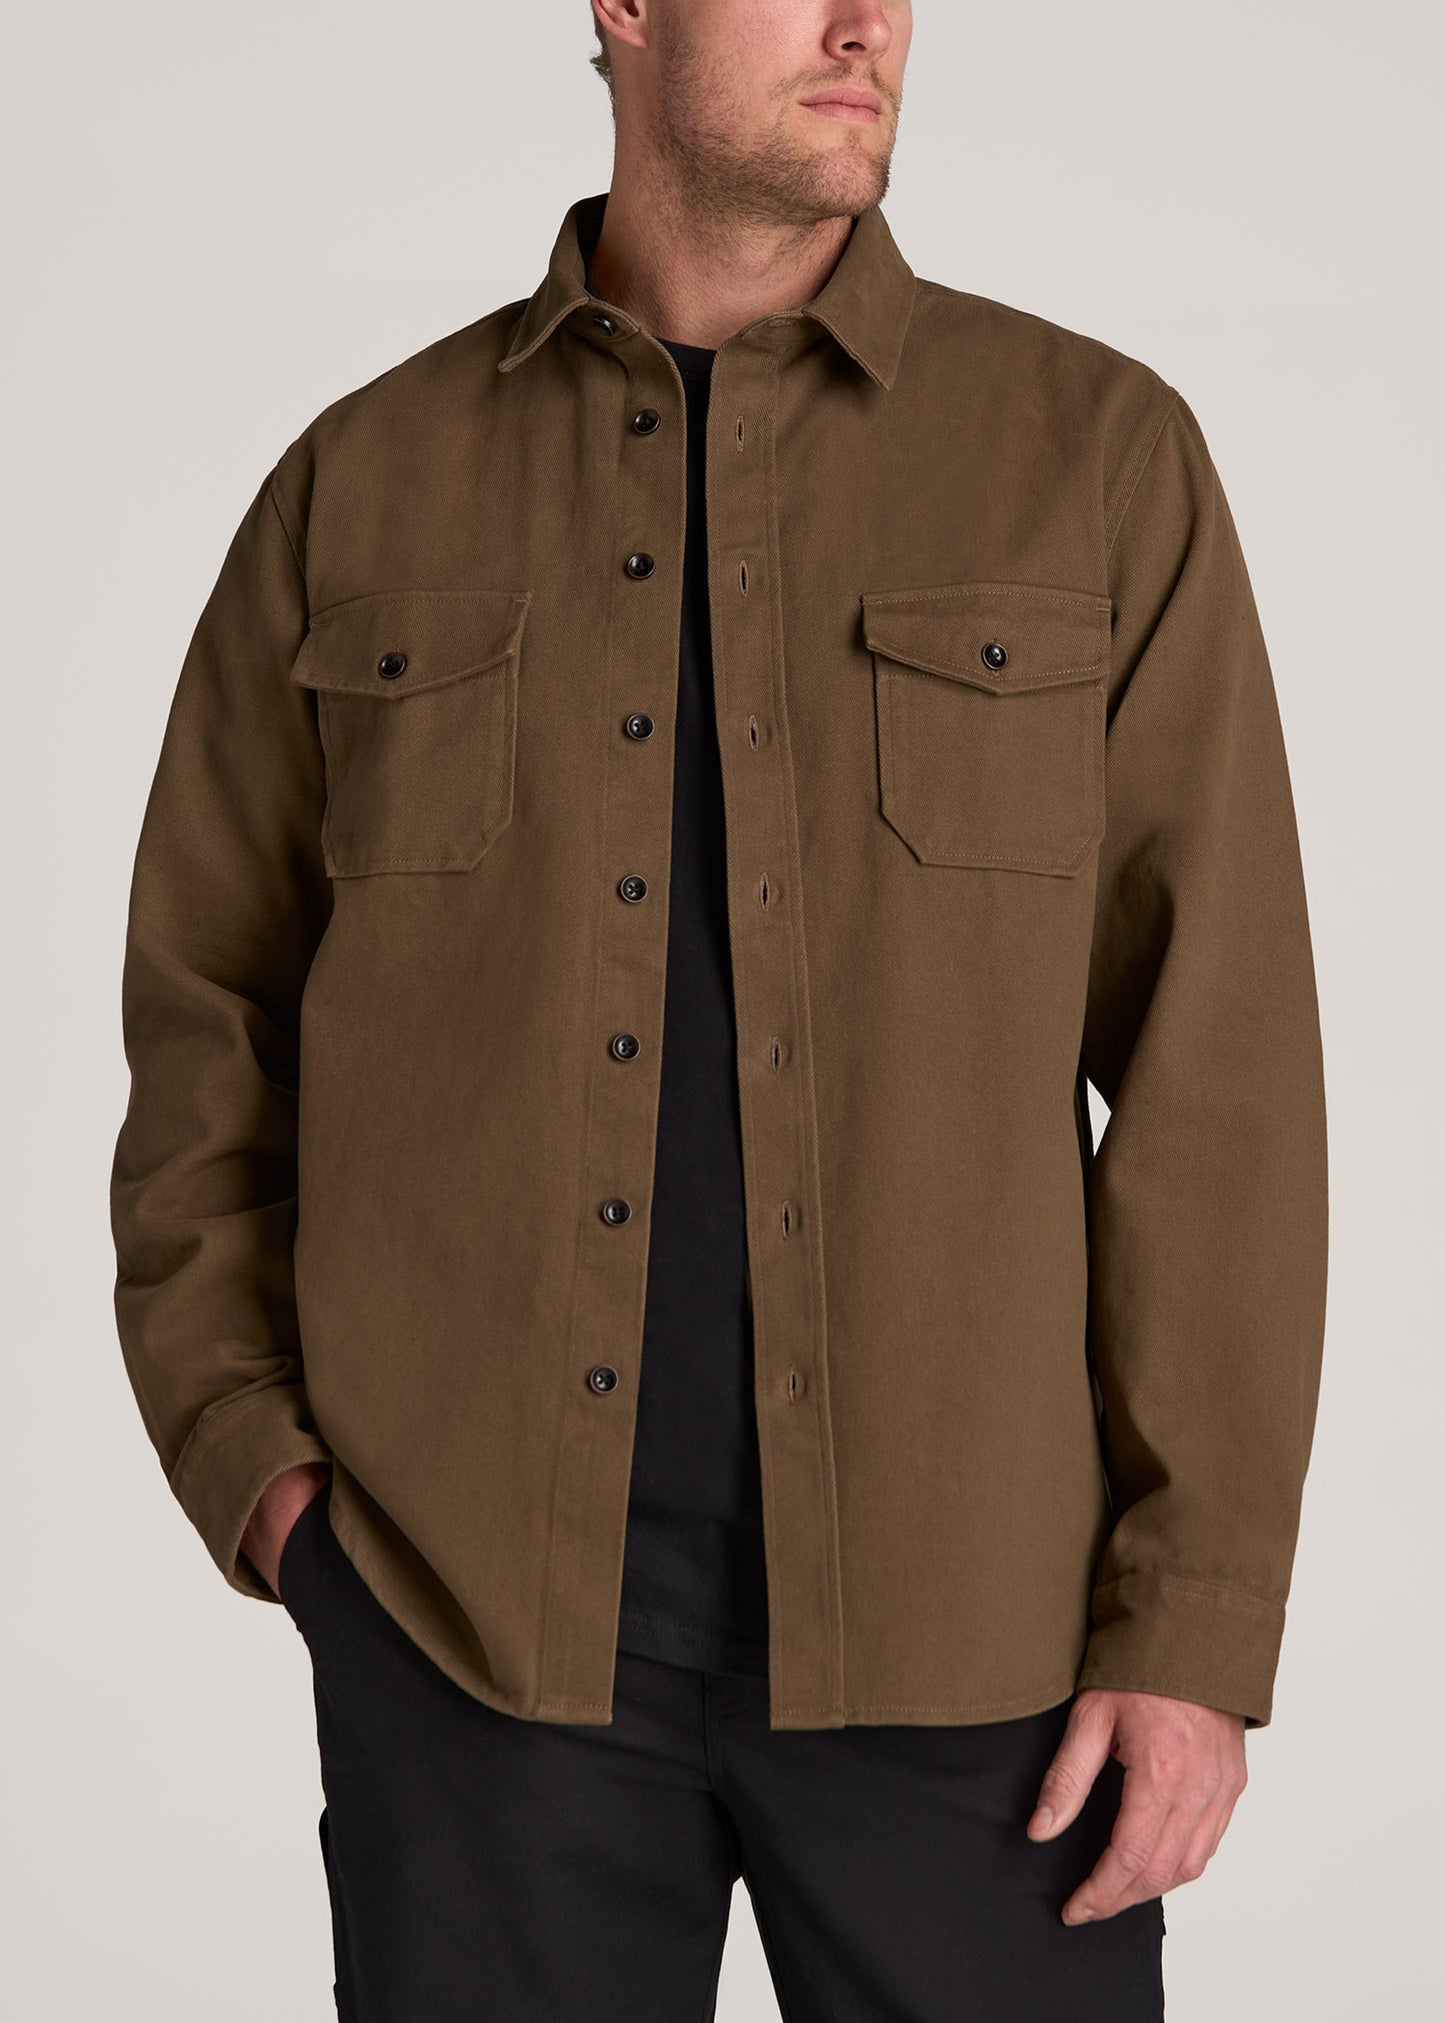 LJ&S Heavyweight Cotton Twill Overshirt for Tall Men in Grizzly Brown